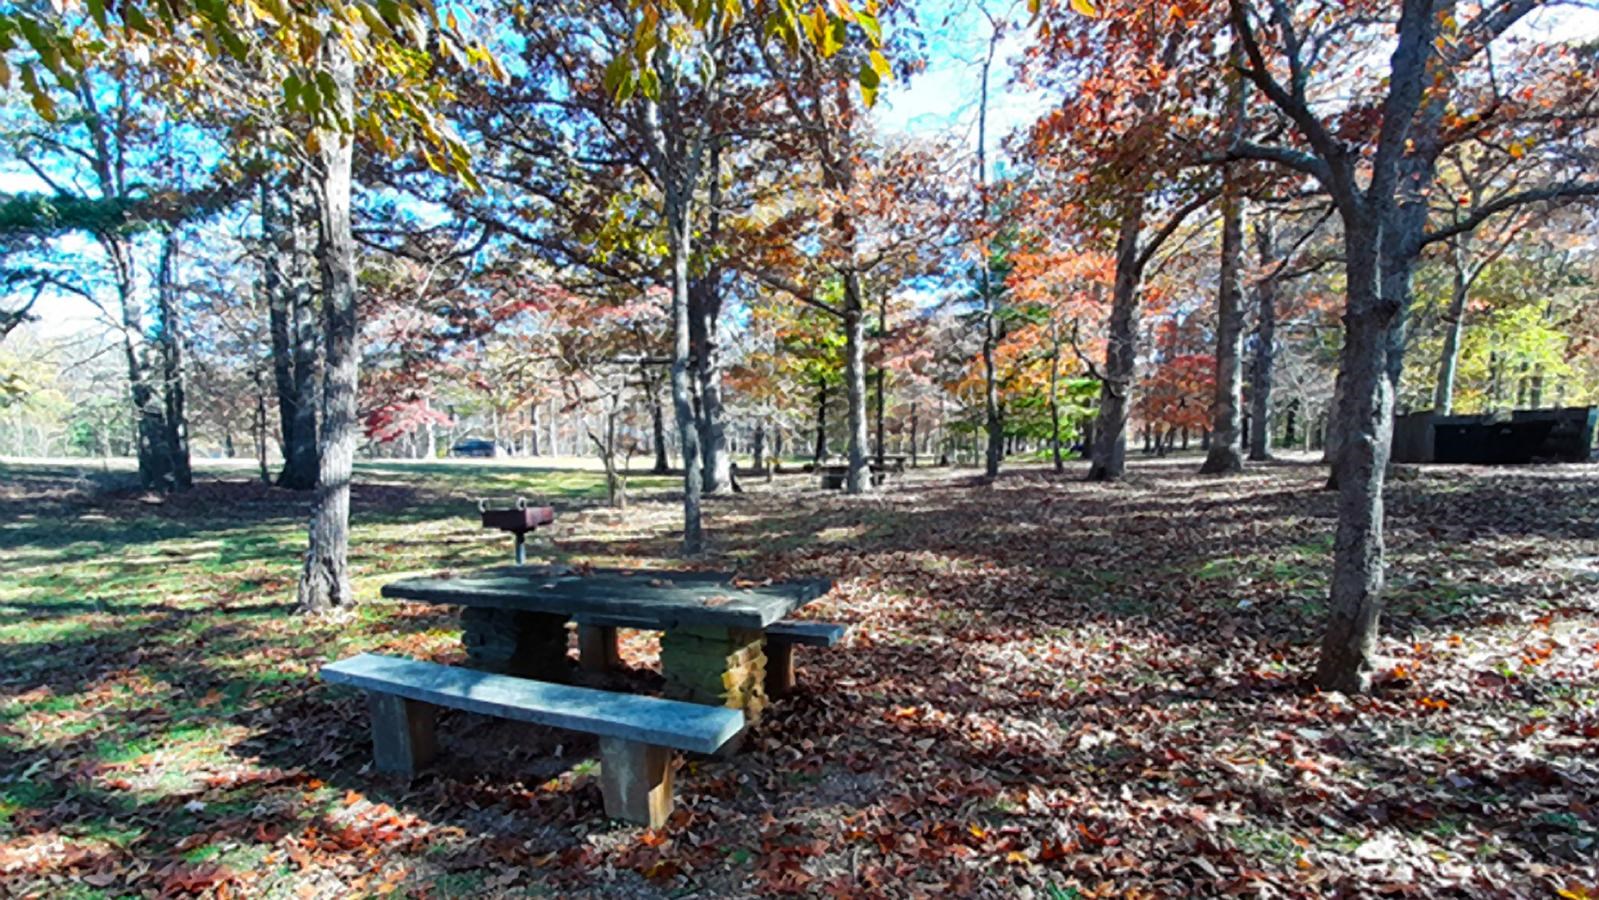 A concrete picnic table sits empty on a grassy lawn dotted with colorful leaves